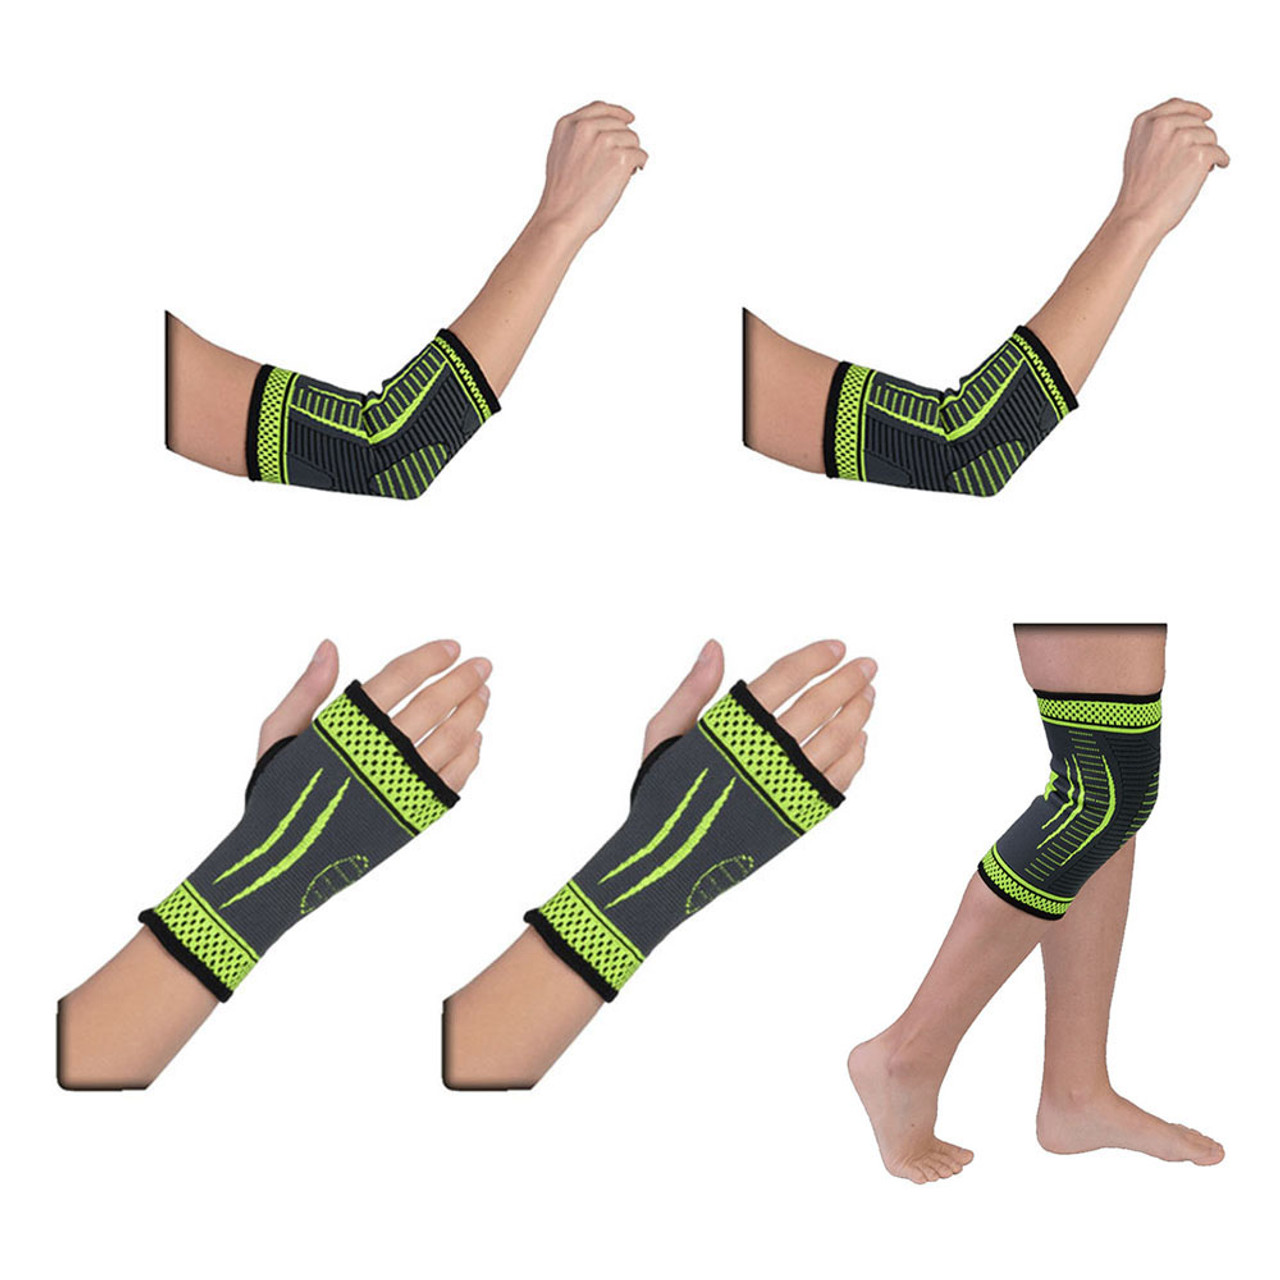 Flexible Stretch Joint Compression Sleeve Support Brace (Multi-Packs) product image